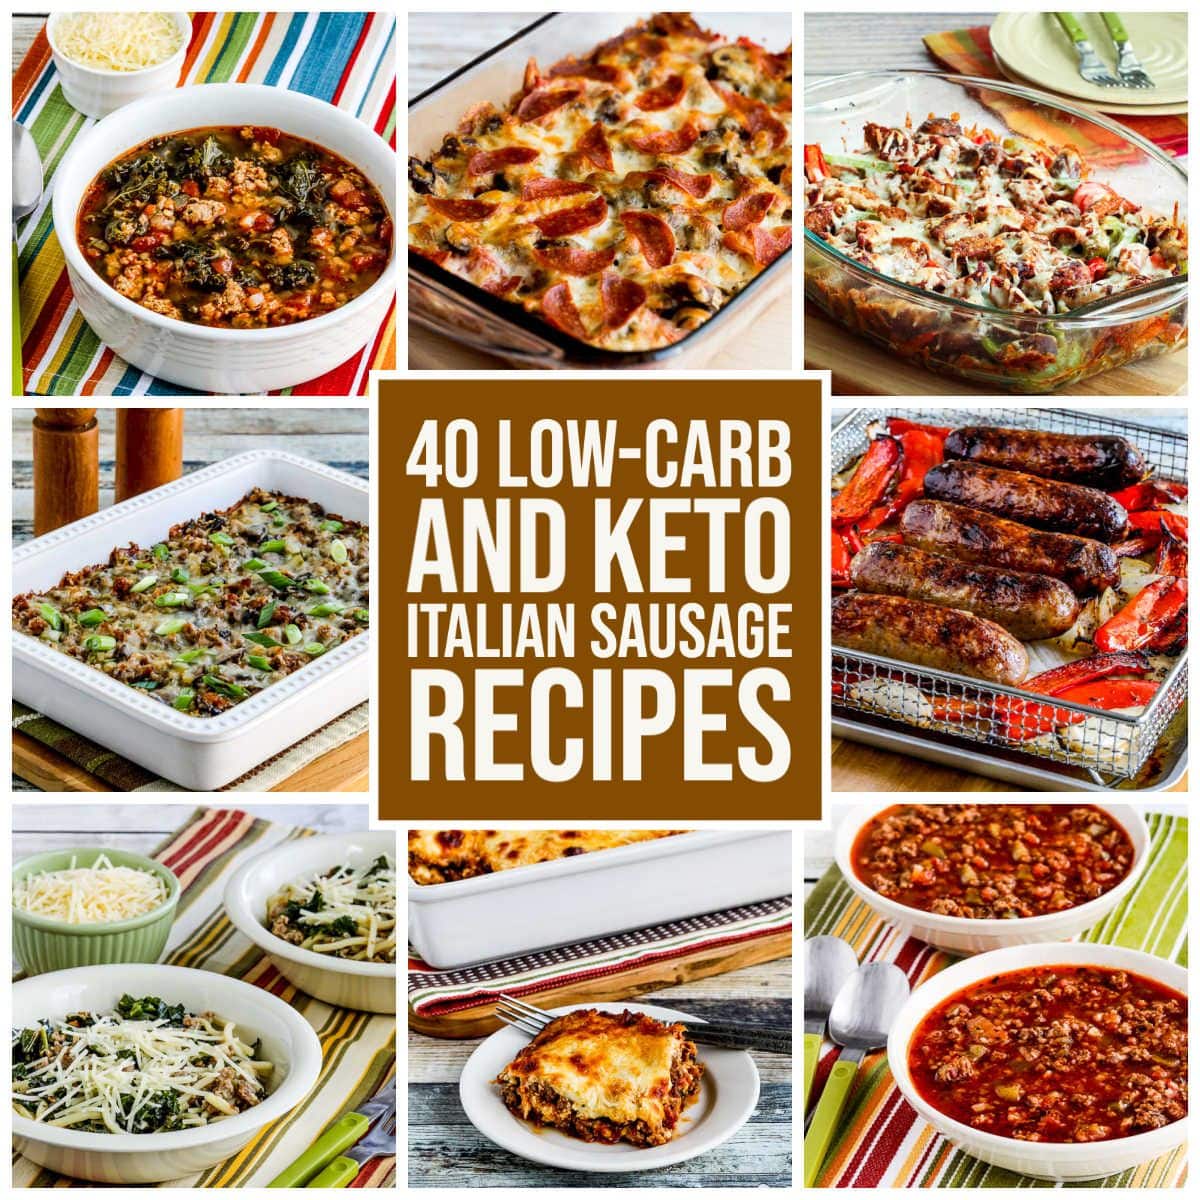 40 low carb and keto Italian sausage recipes featured recipe collage with text overlay